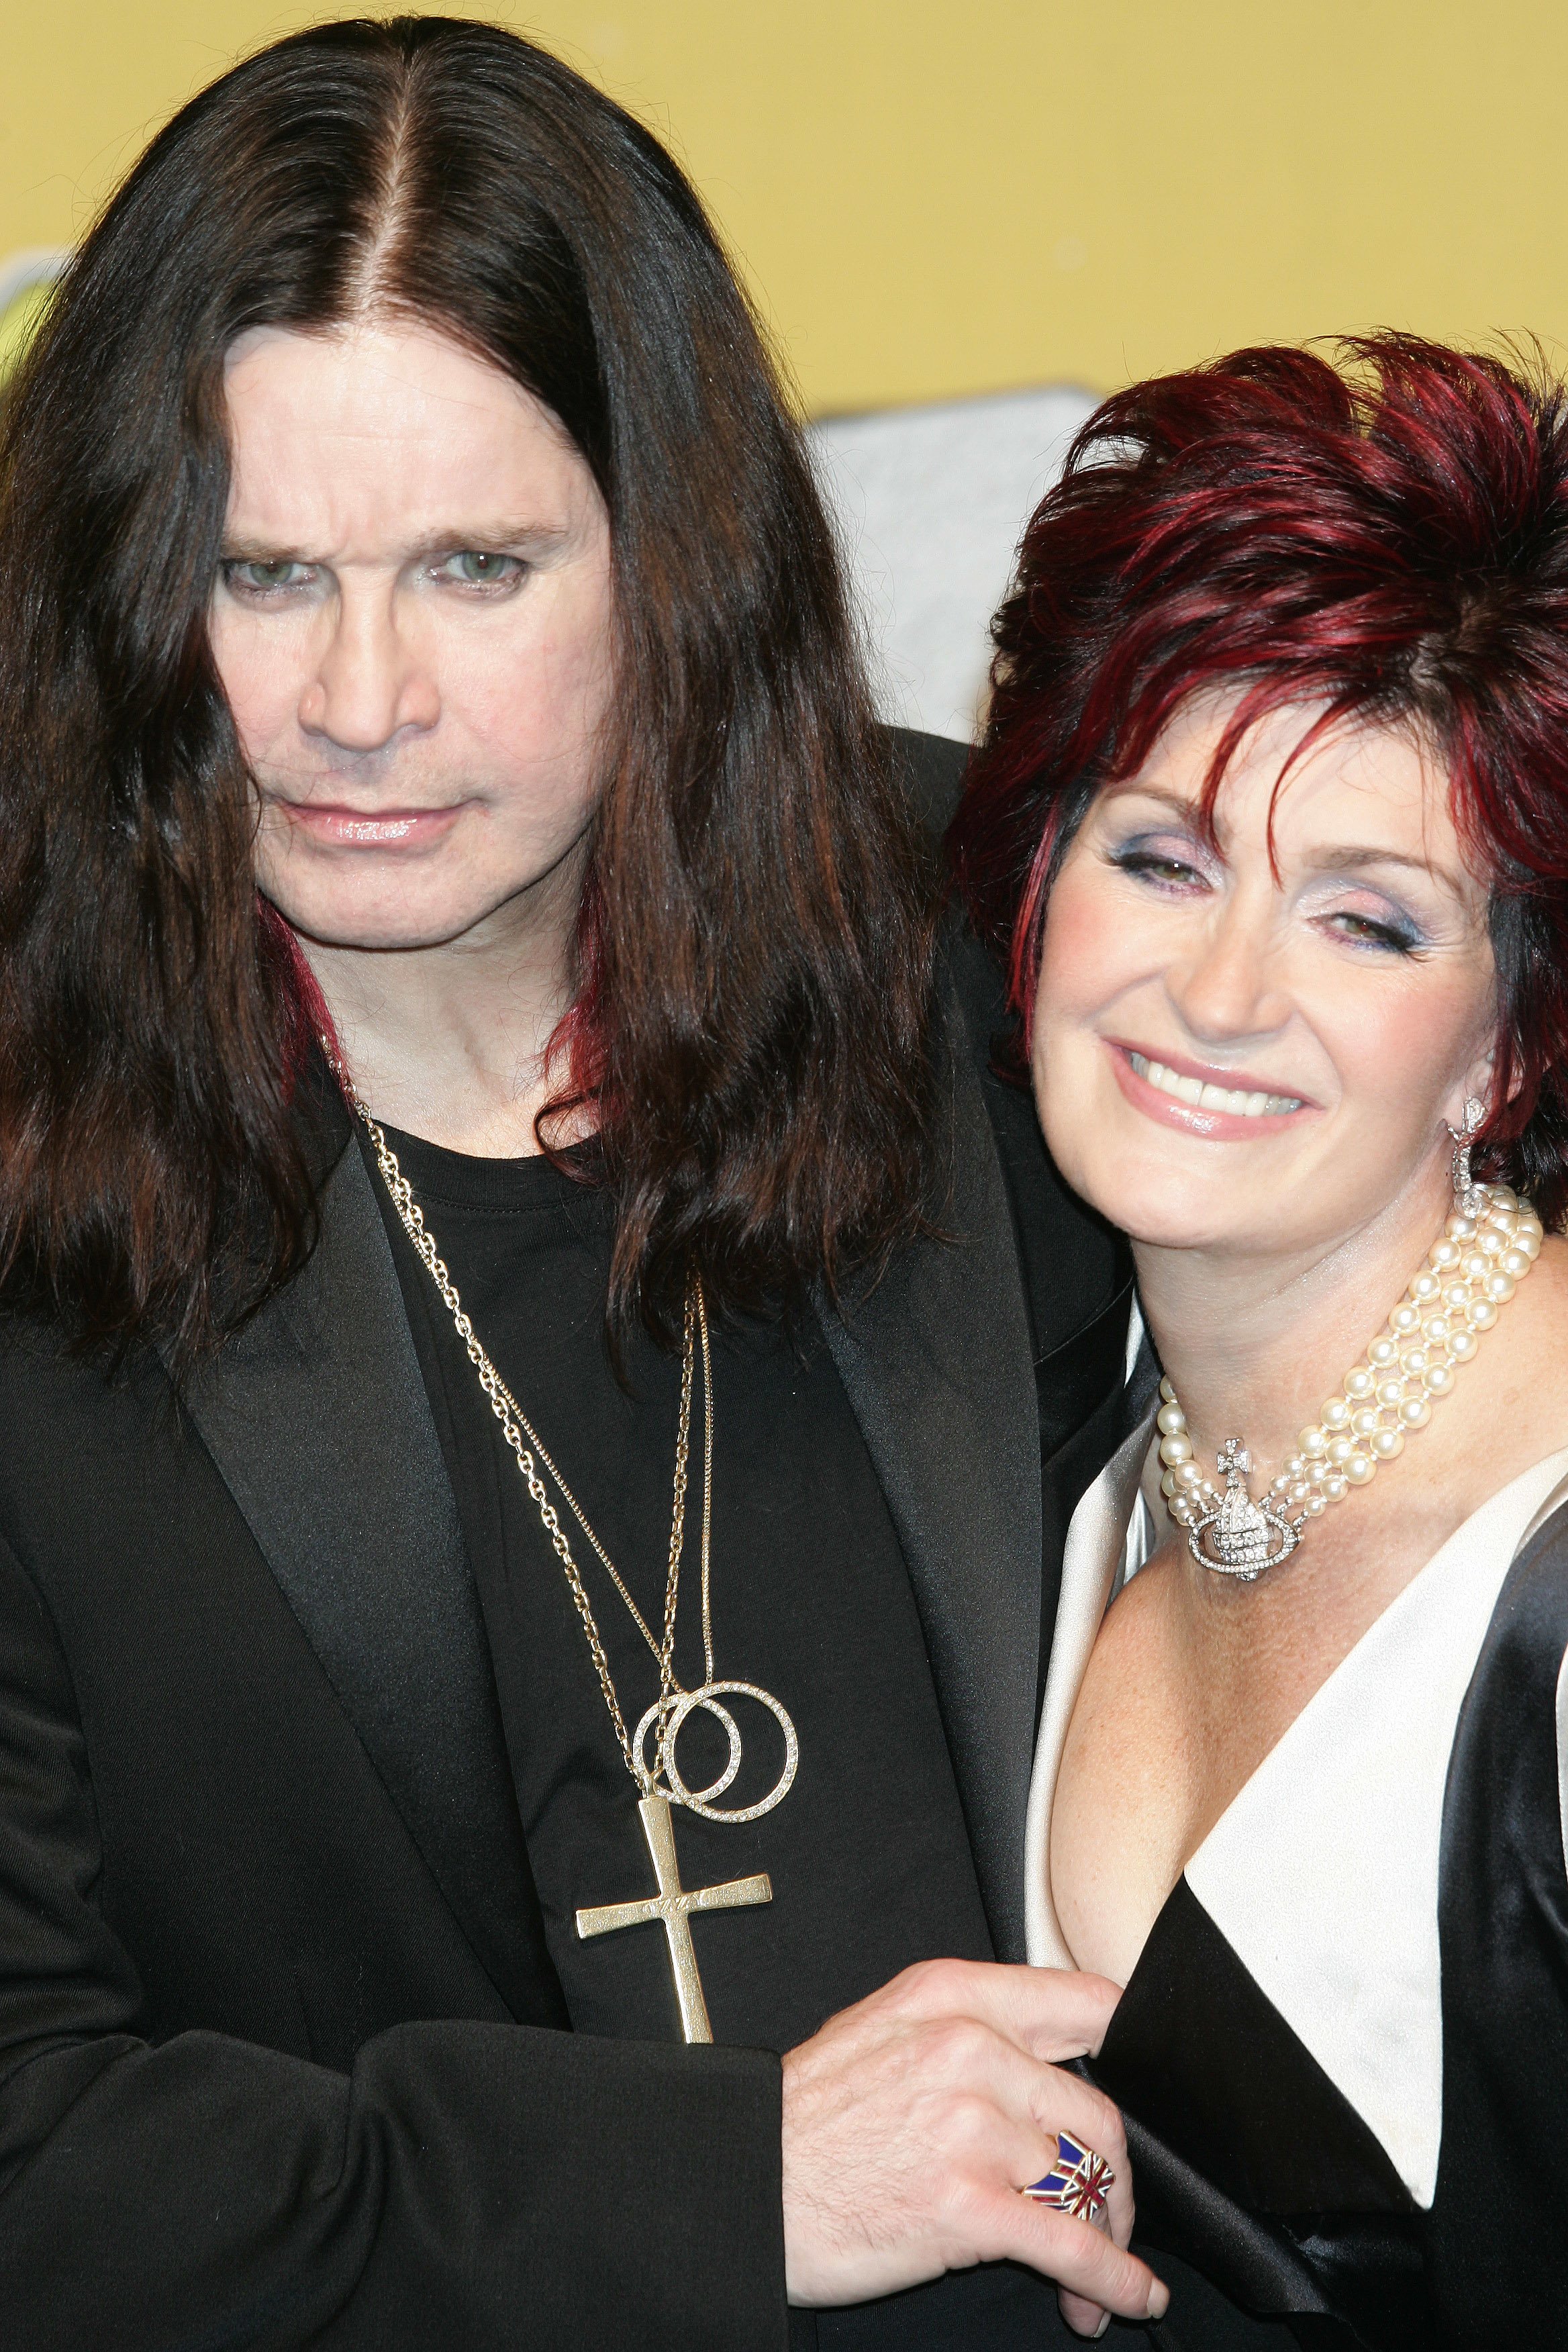 Ozzy and Sharon Osbourne in the press room at the MTV Europe Music Awards in Roma on November 18, 2004 | Source: Getty Images